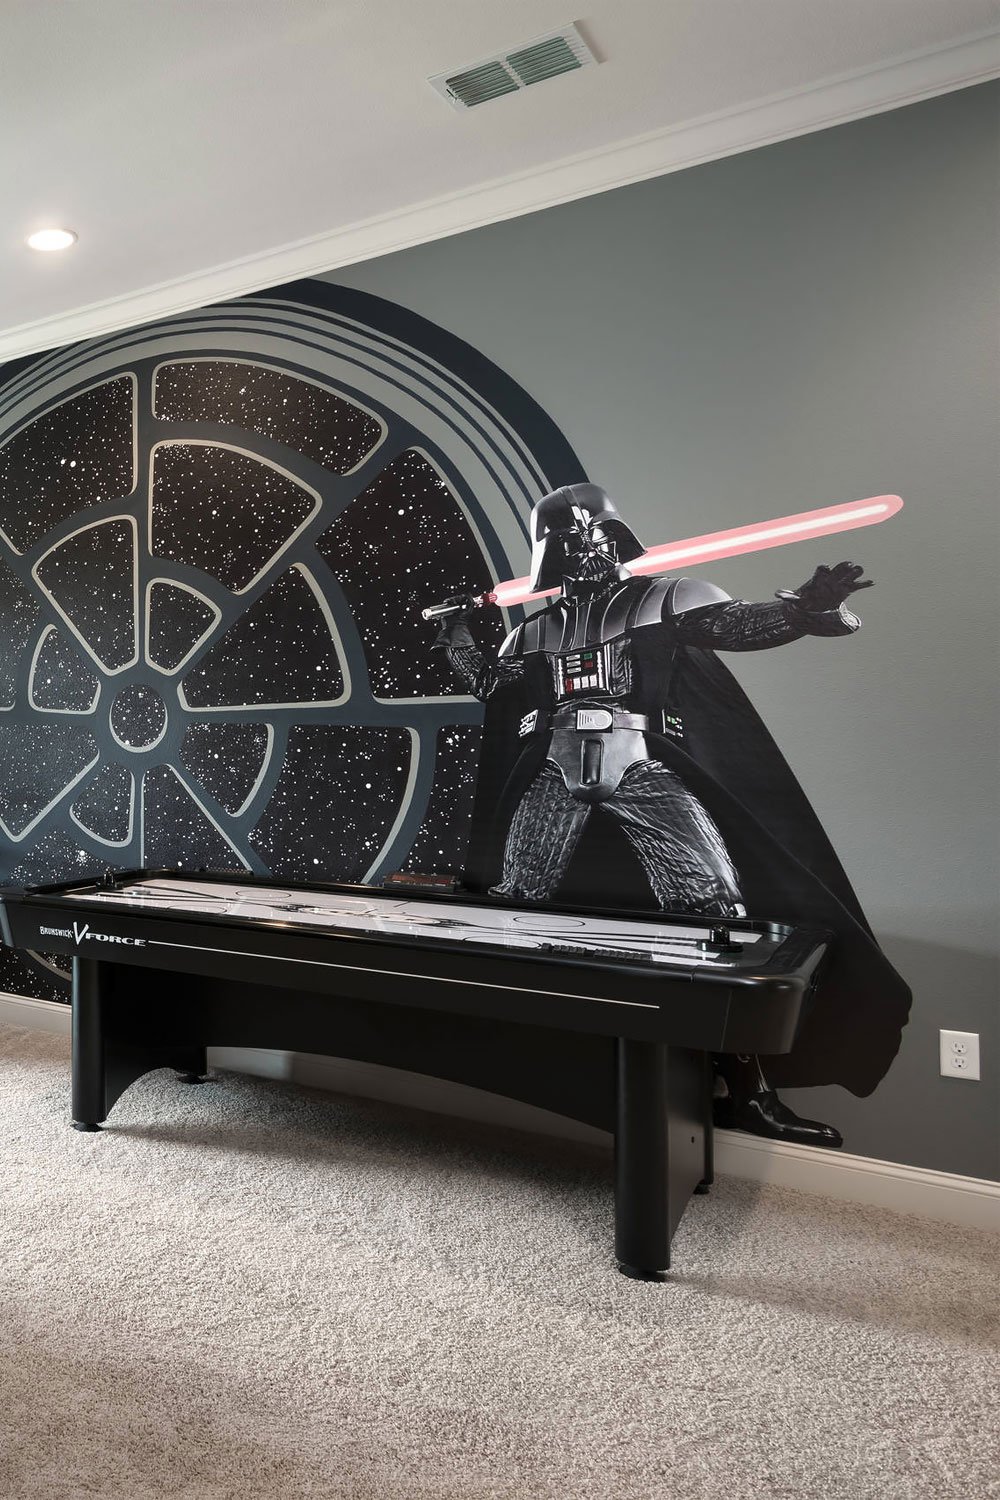 Star Wars Themed Game Room Ideas with Air Hockey Table - Basement Game Room Ideas; Here are some brilliantly entertaining game room basement ideas with game room decor to spark your next project!